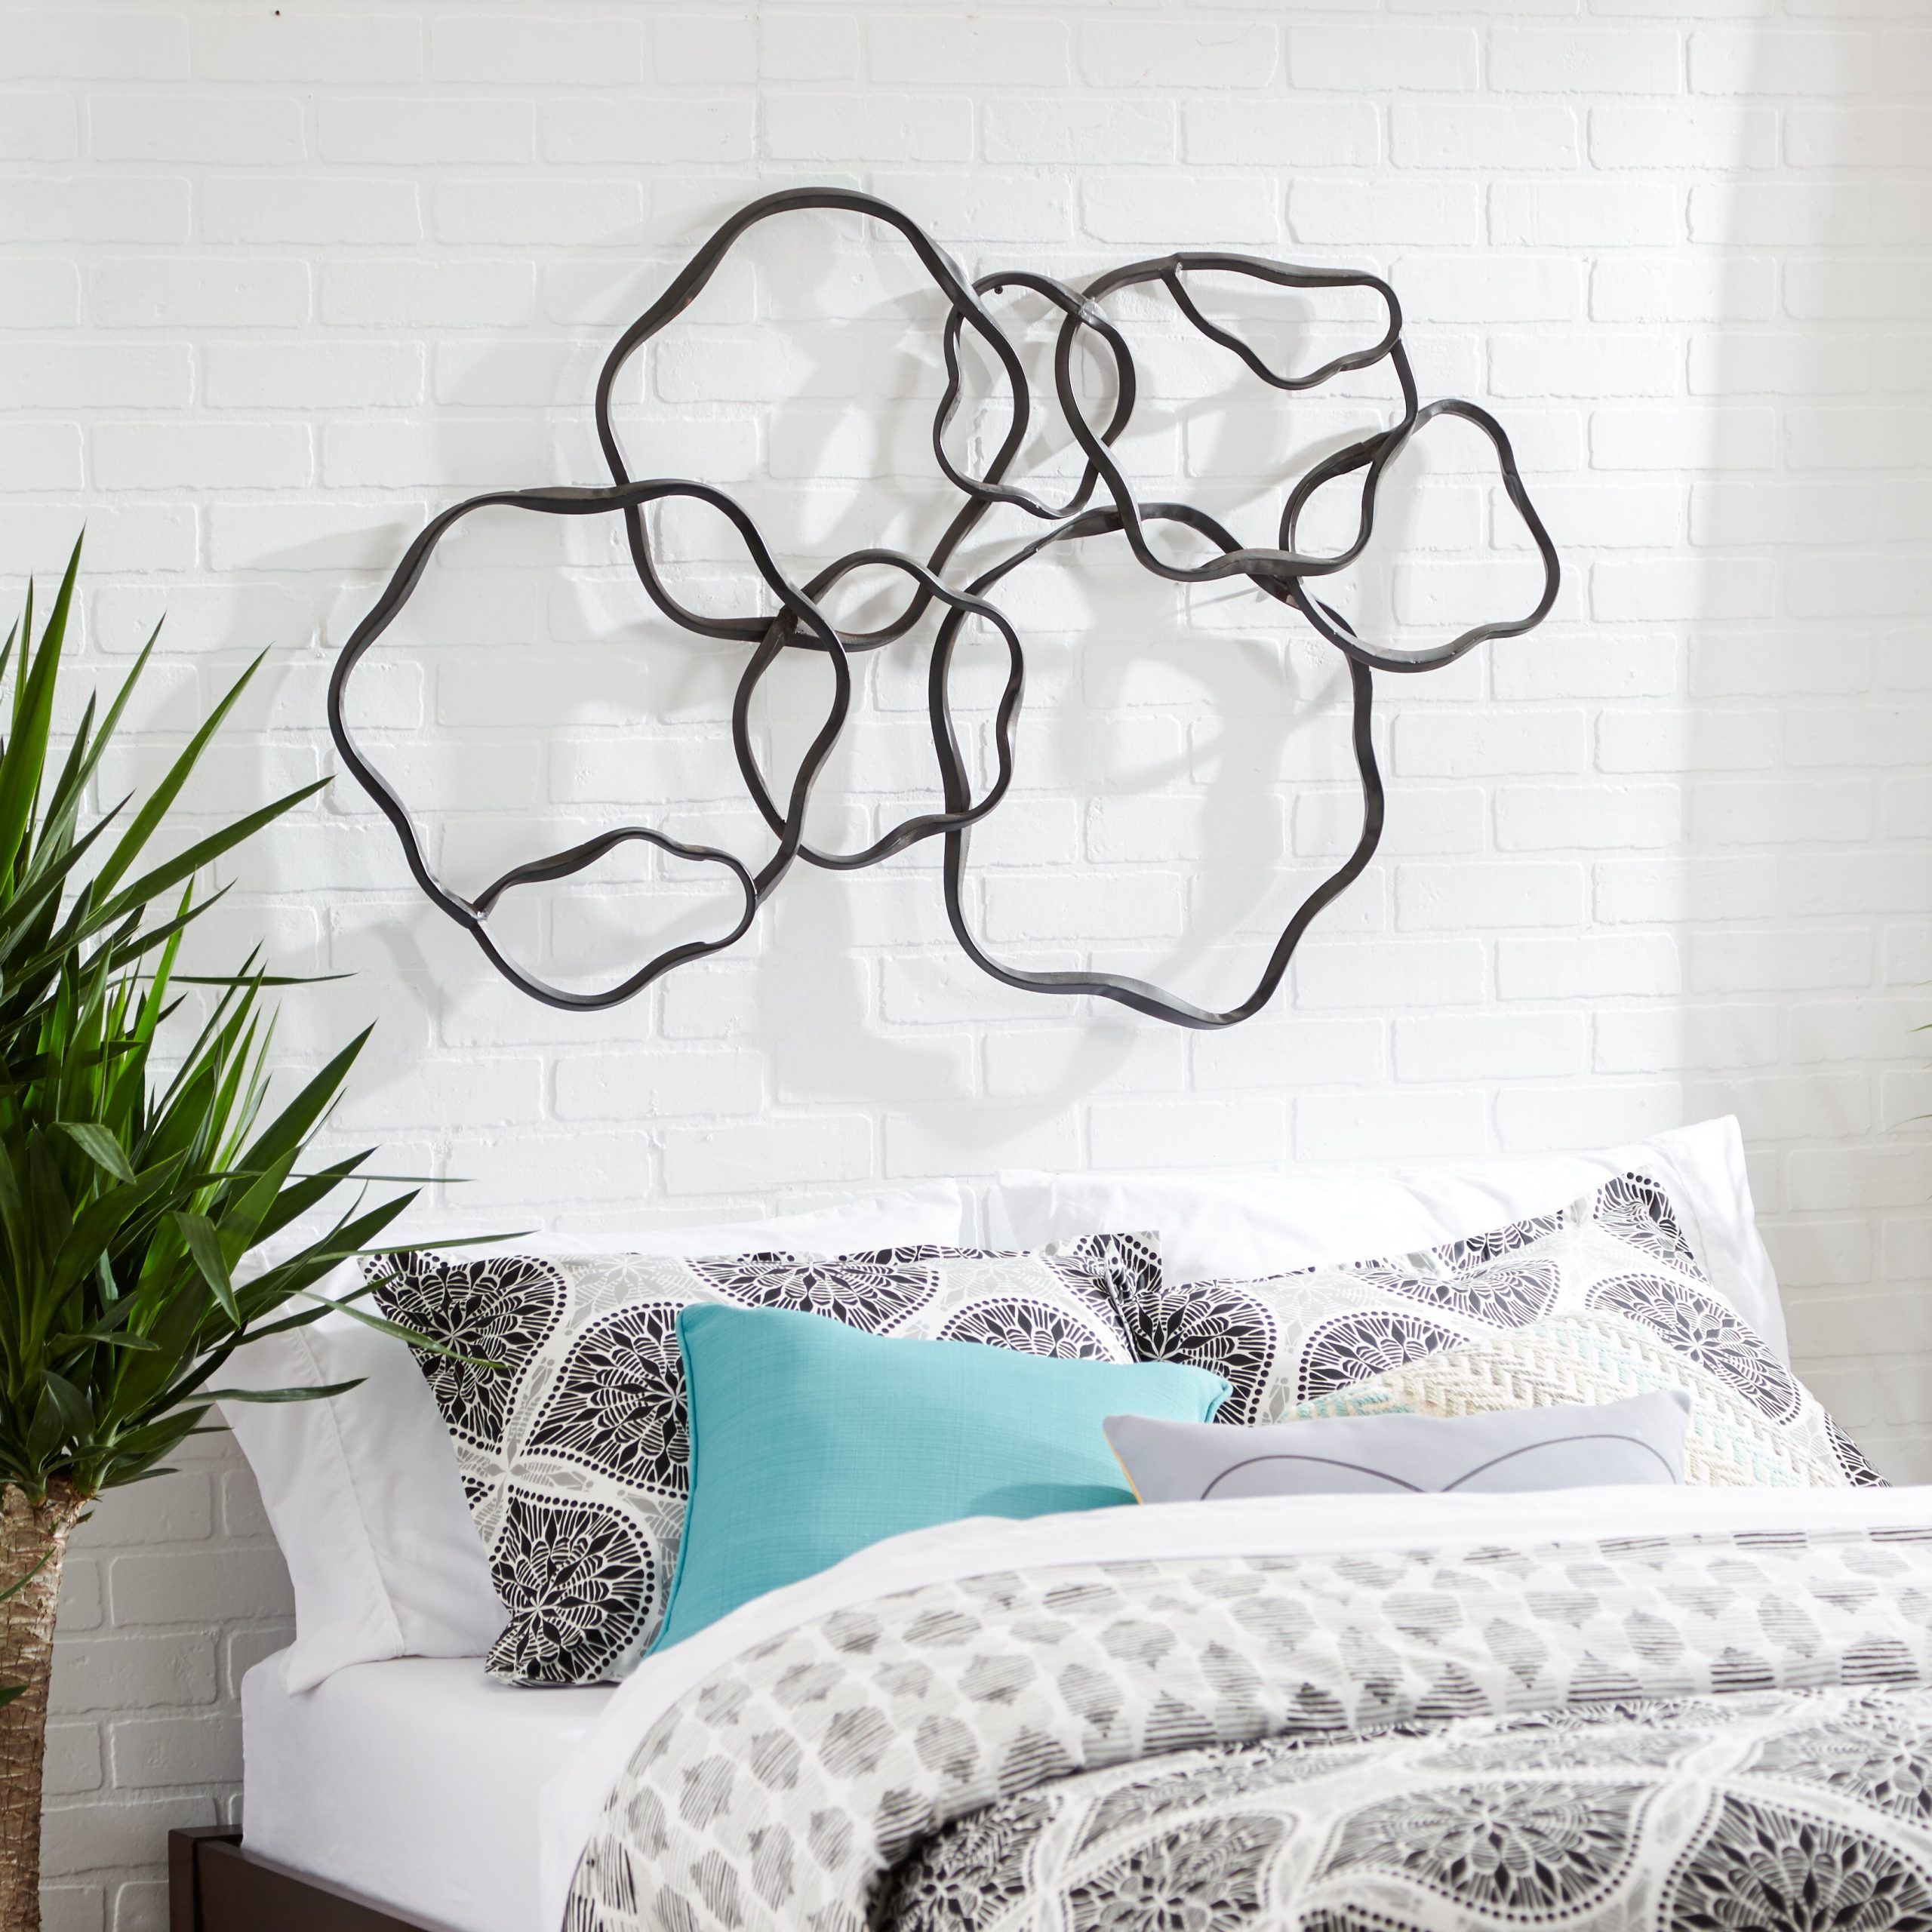 Rings Wall Décor | Wayfair With Regard To Most Recently Released Layered Rings Metal Wall Art (View 16 of 20)